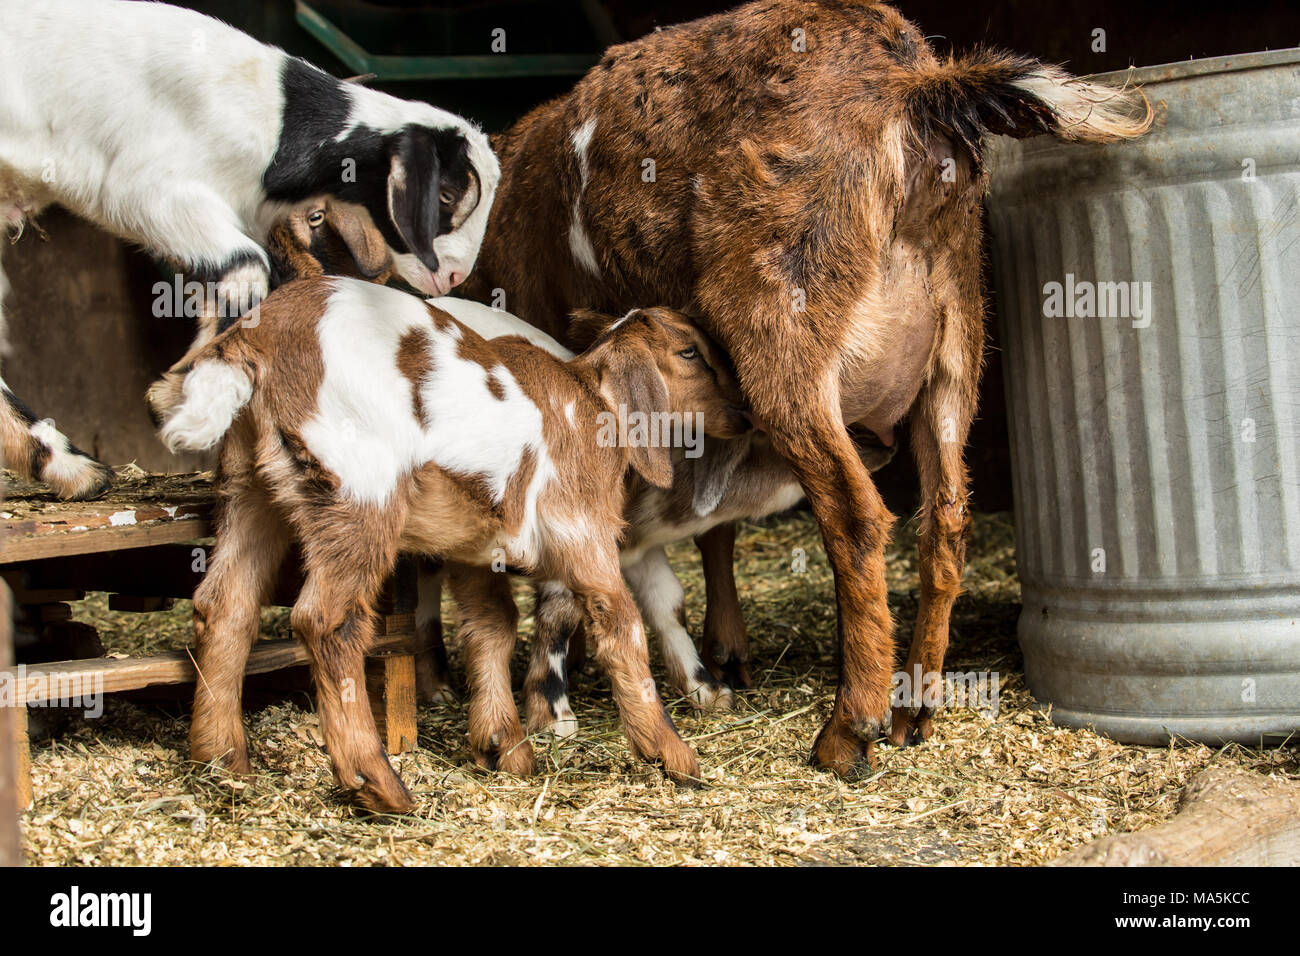 Two 12 day old mixed breed Nubian and Boer goat kids nursing as another looks on Stock Photo